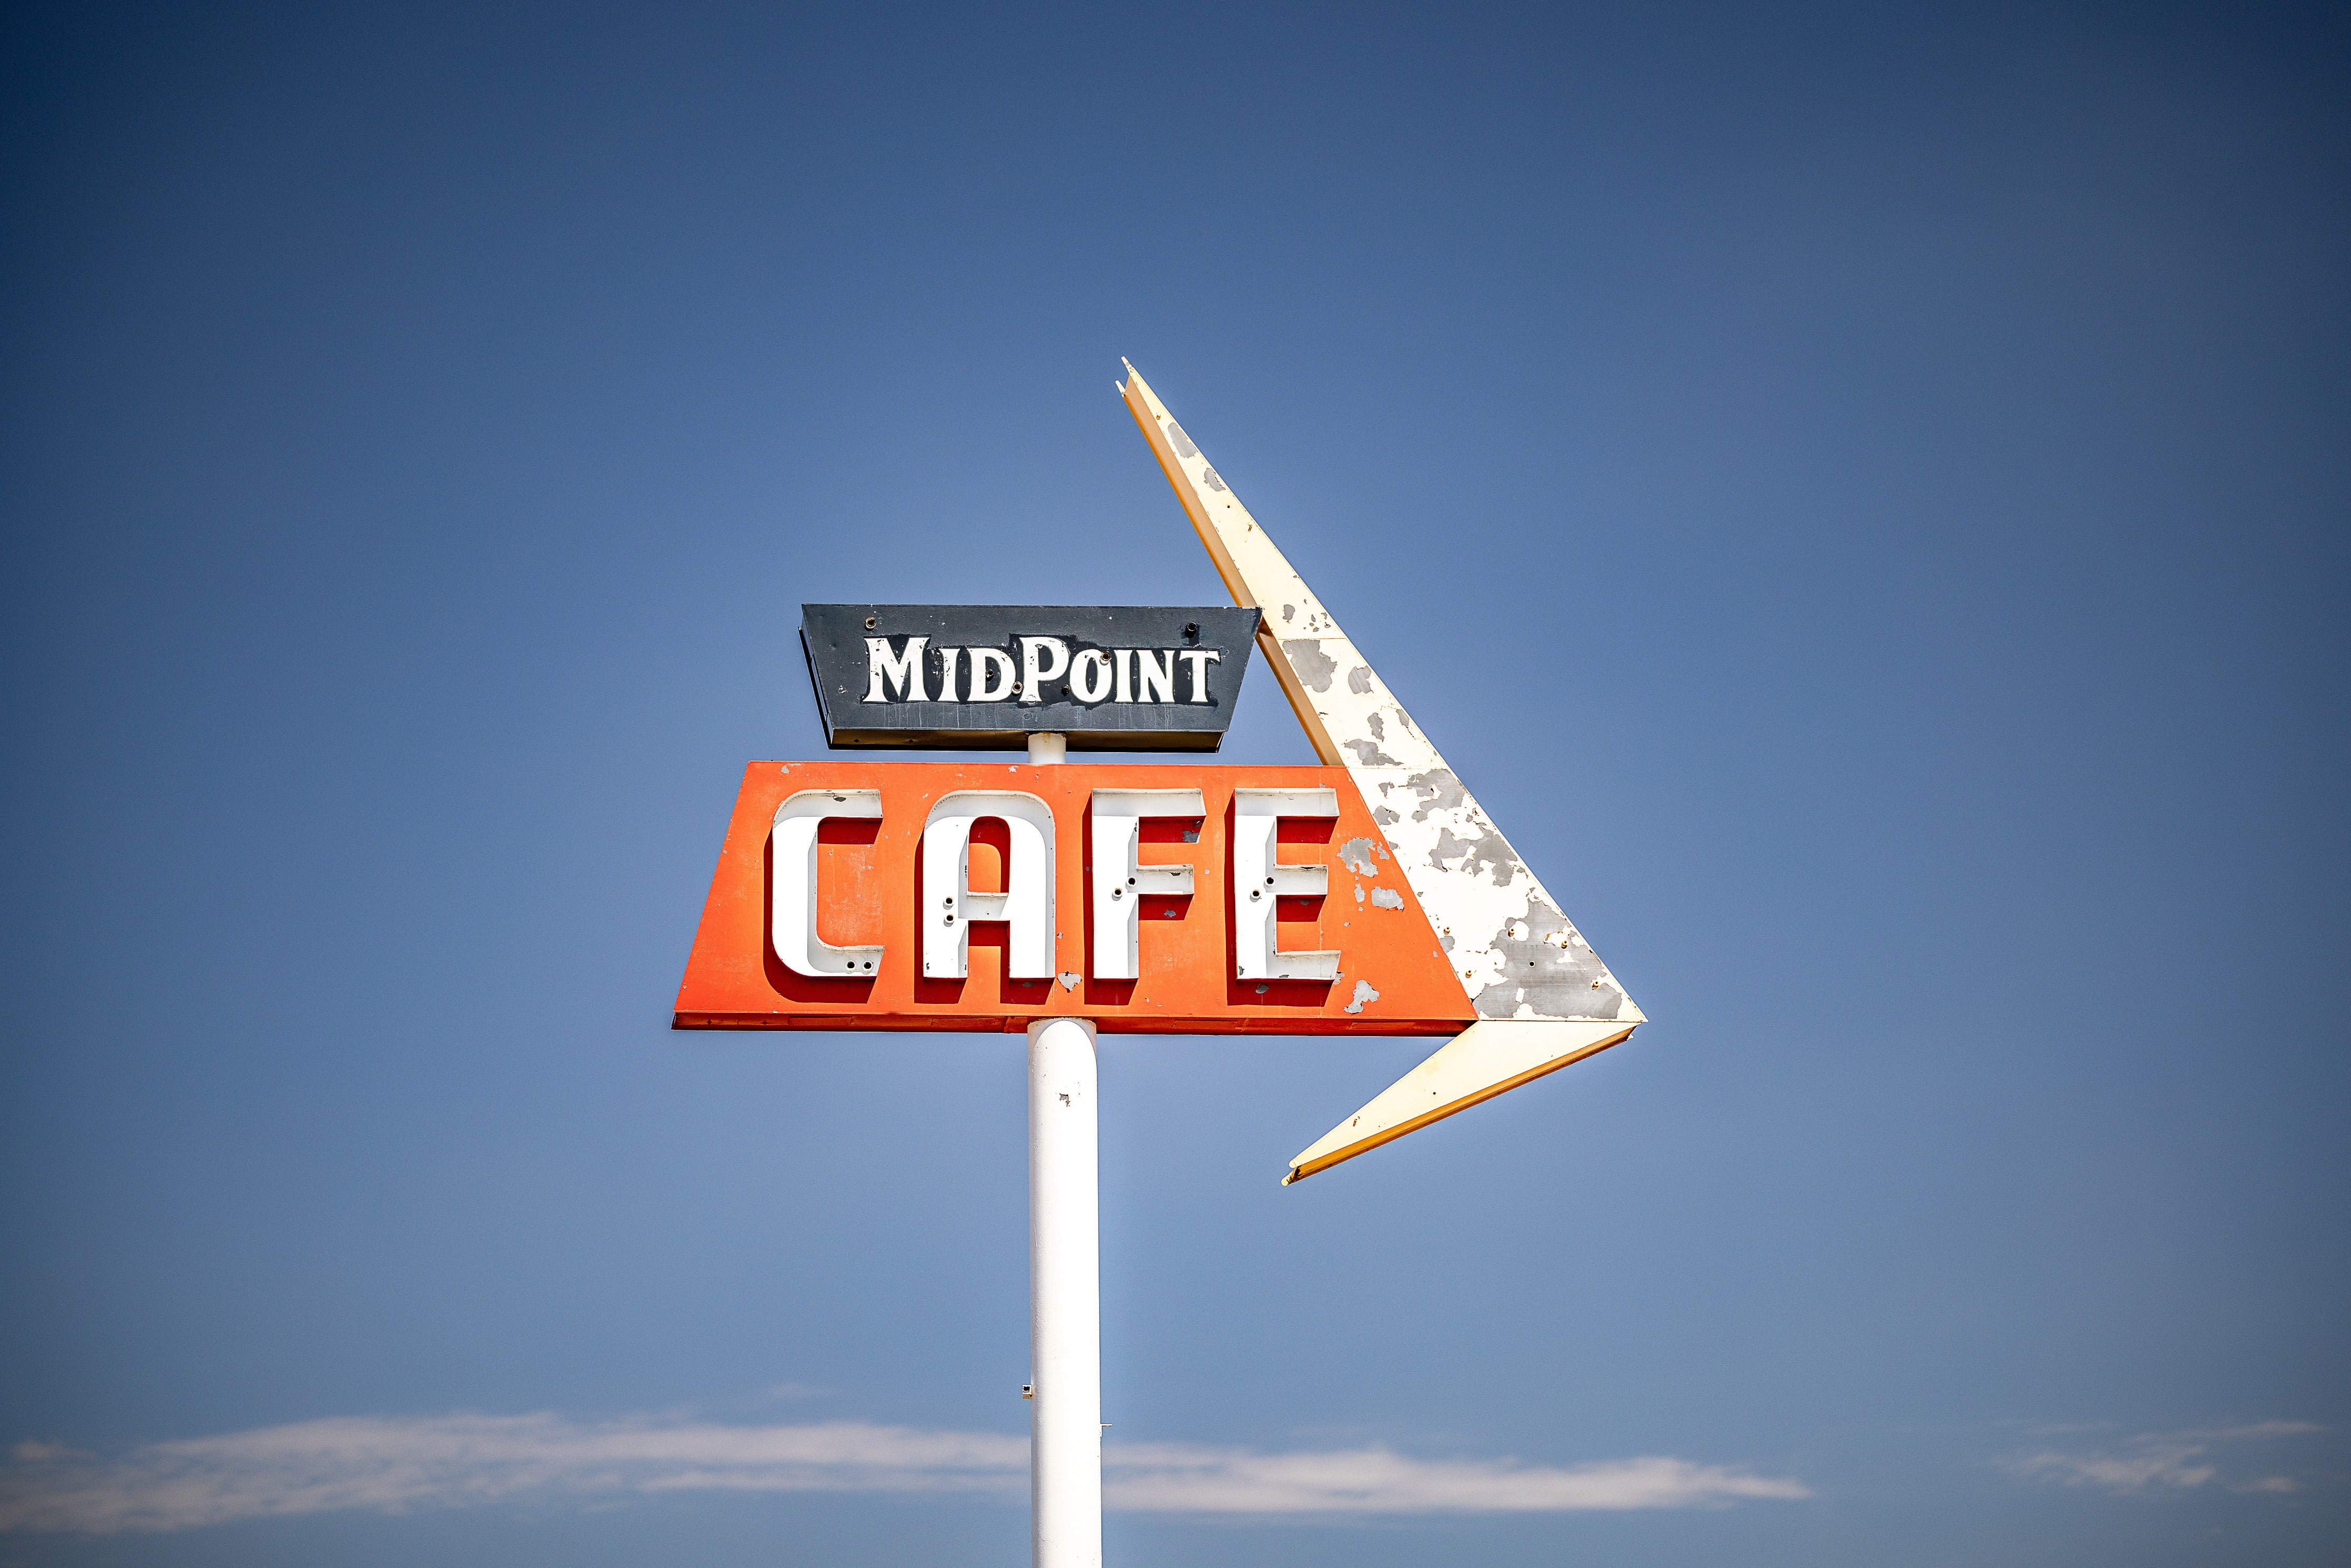 Old Sad Songs Photography - Midpoint Cafe Sign